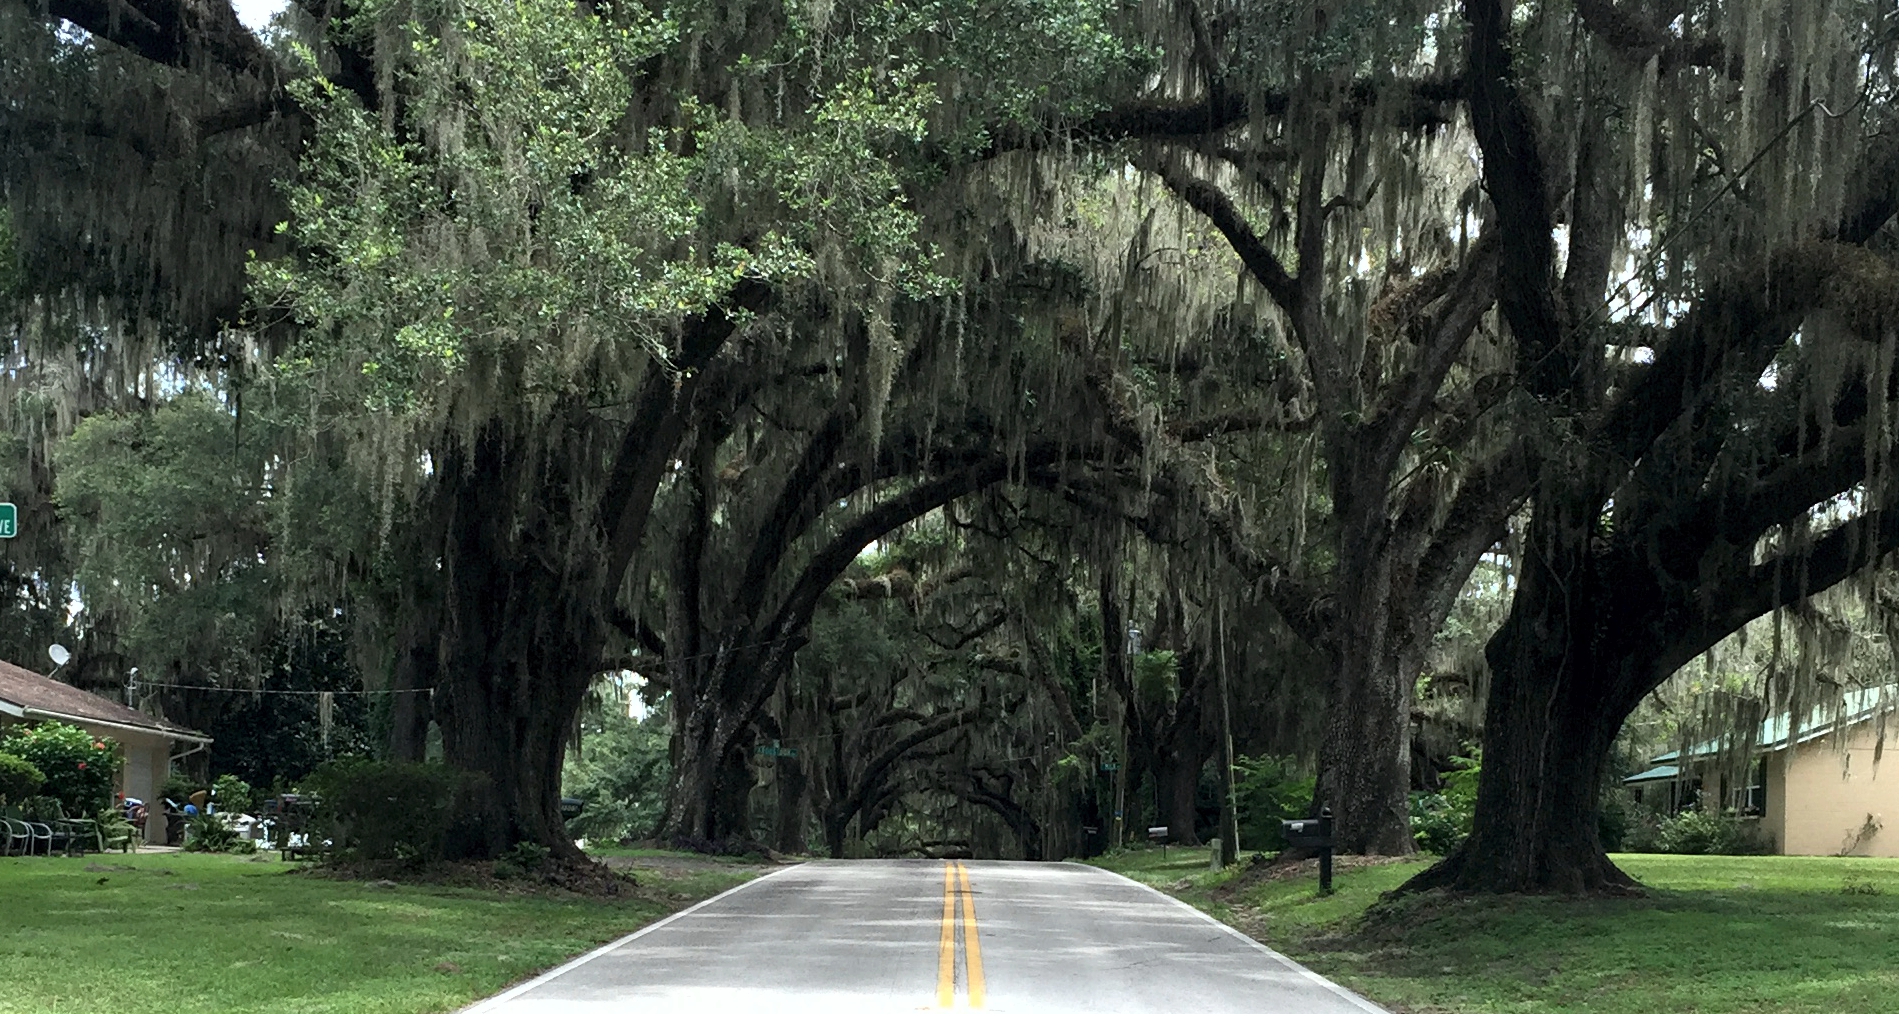 The Avenue of the Oaks in Floral City was created over 100 years ago. 